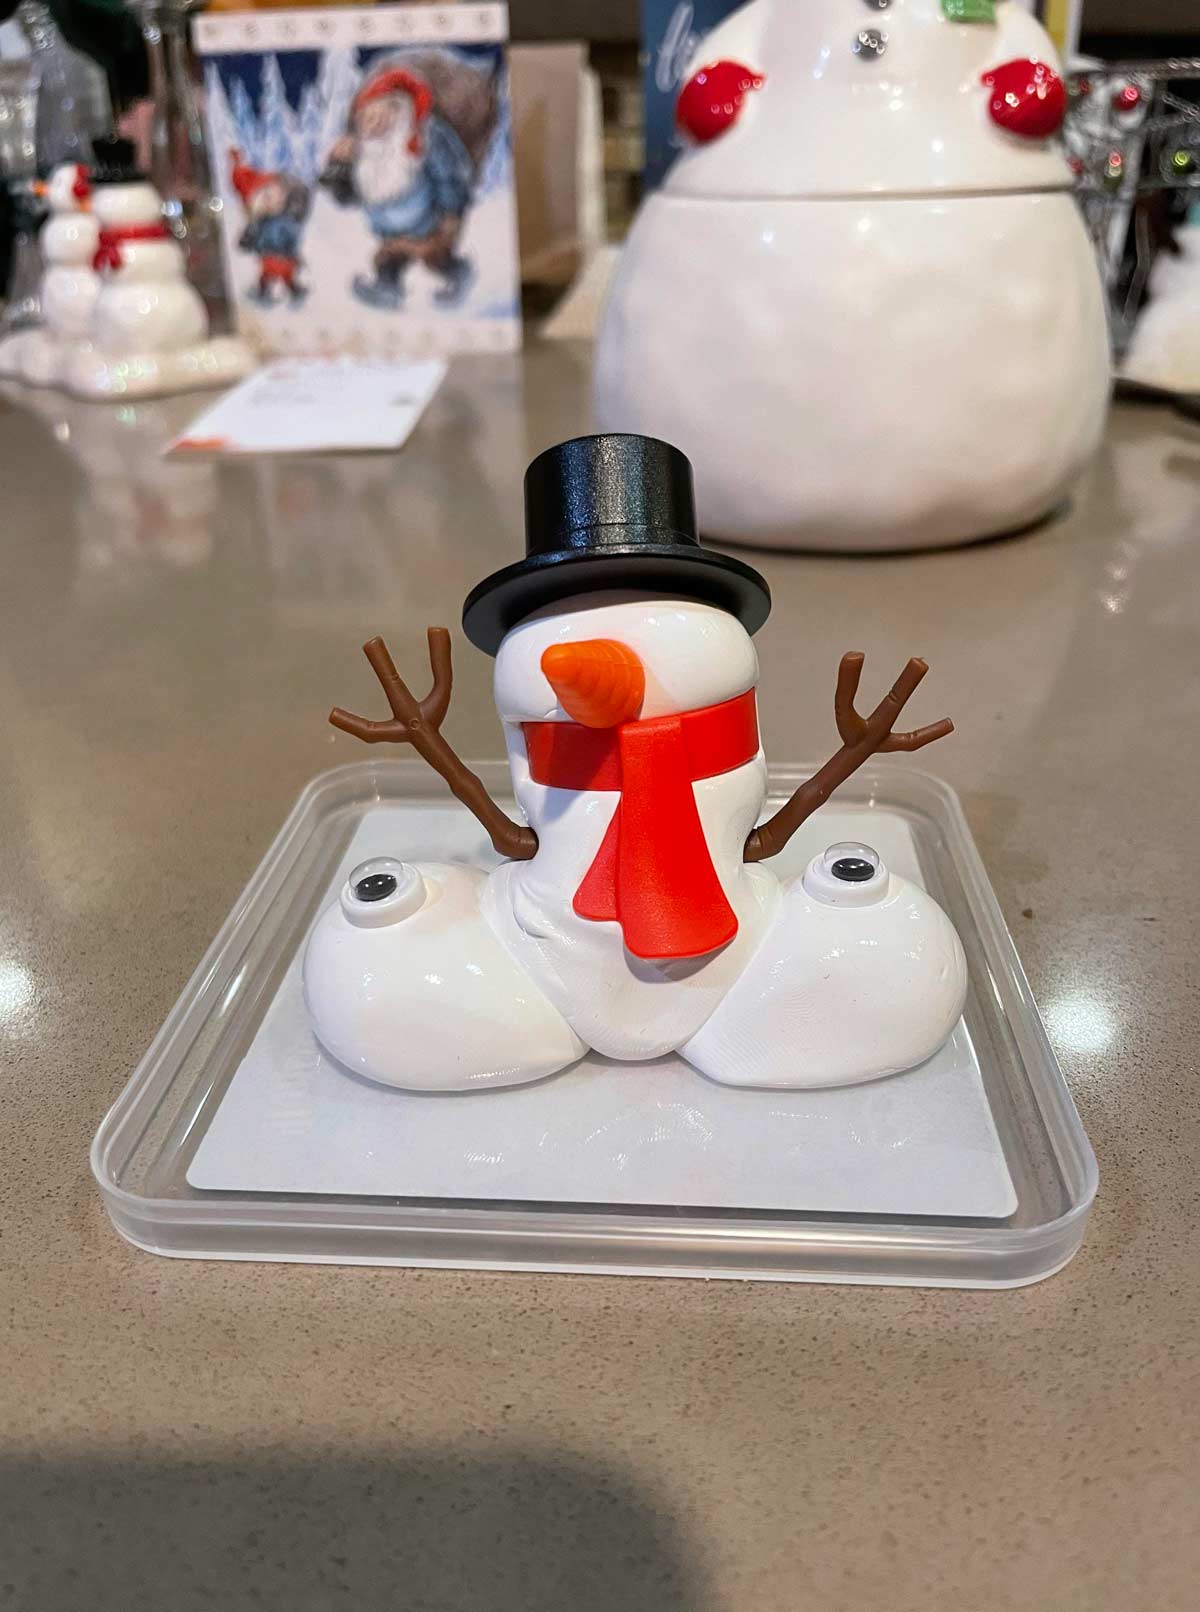 My girlfriend tried to make a melting snowman